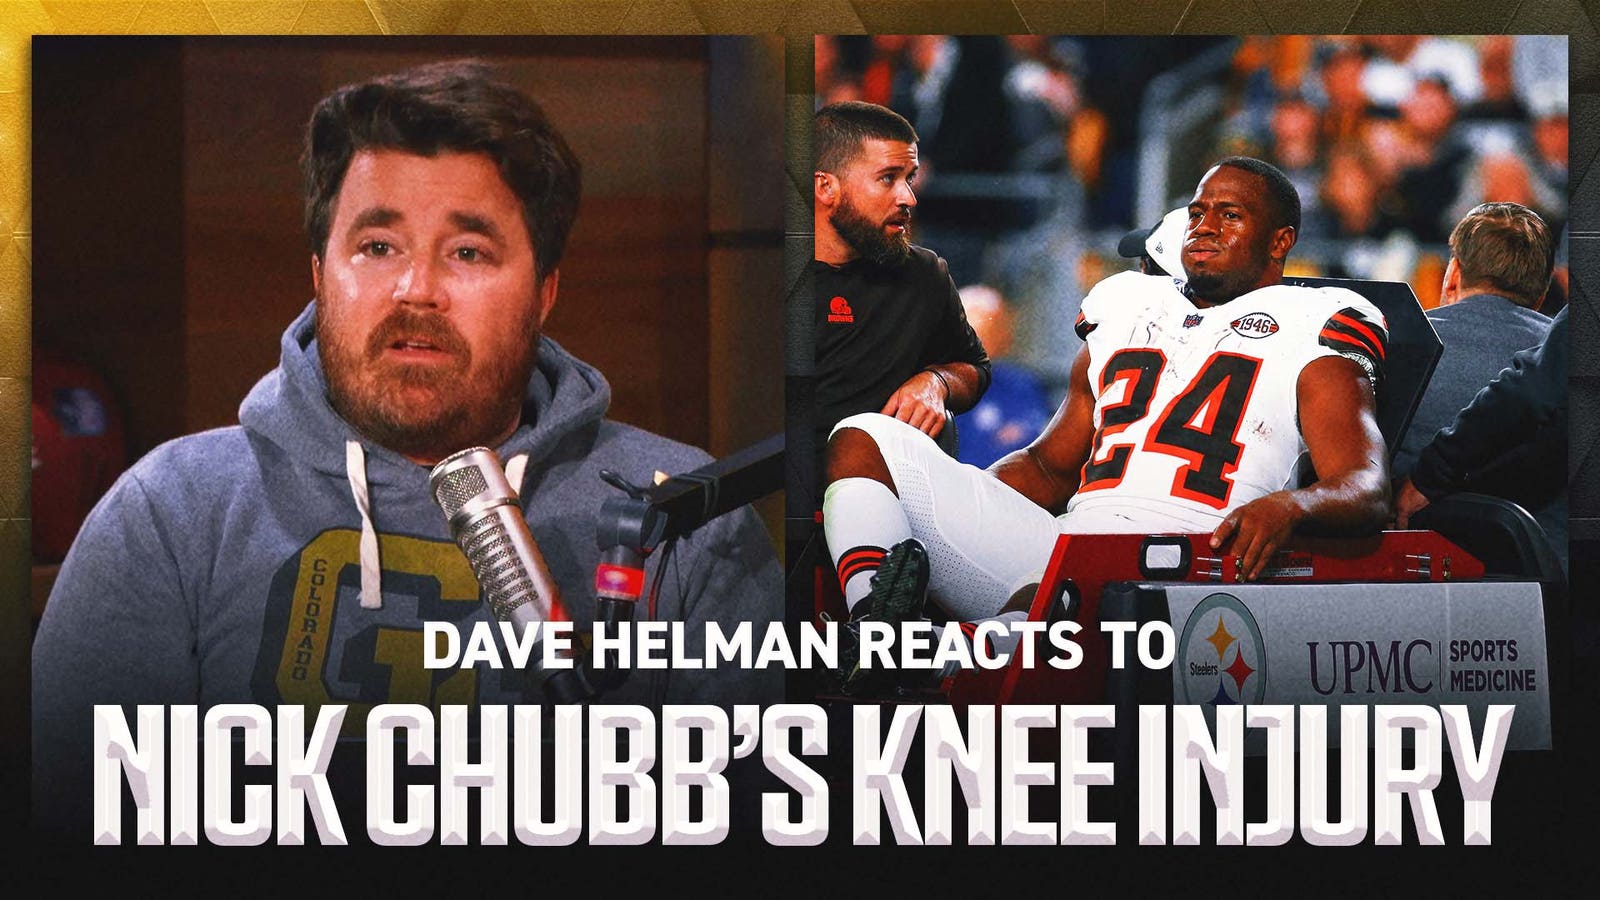 Dave Helman reacts to Nick Chubb's crushing injury in Browns' loss against the Steelers